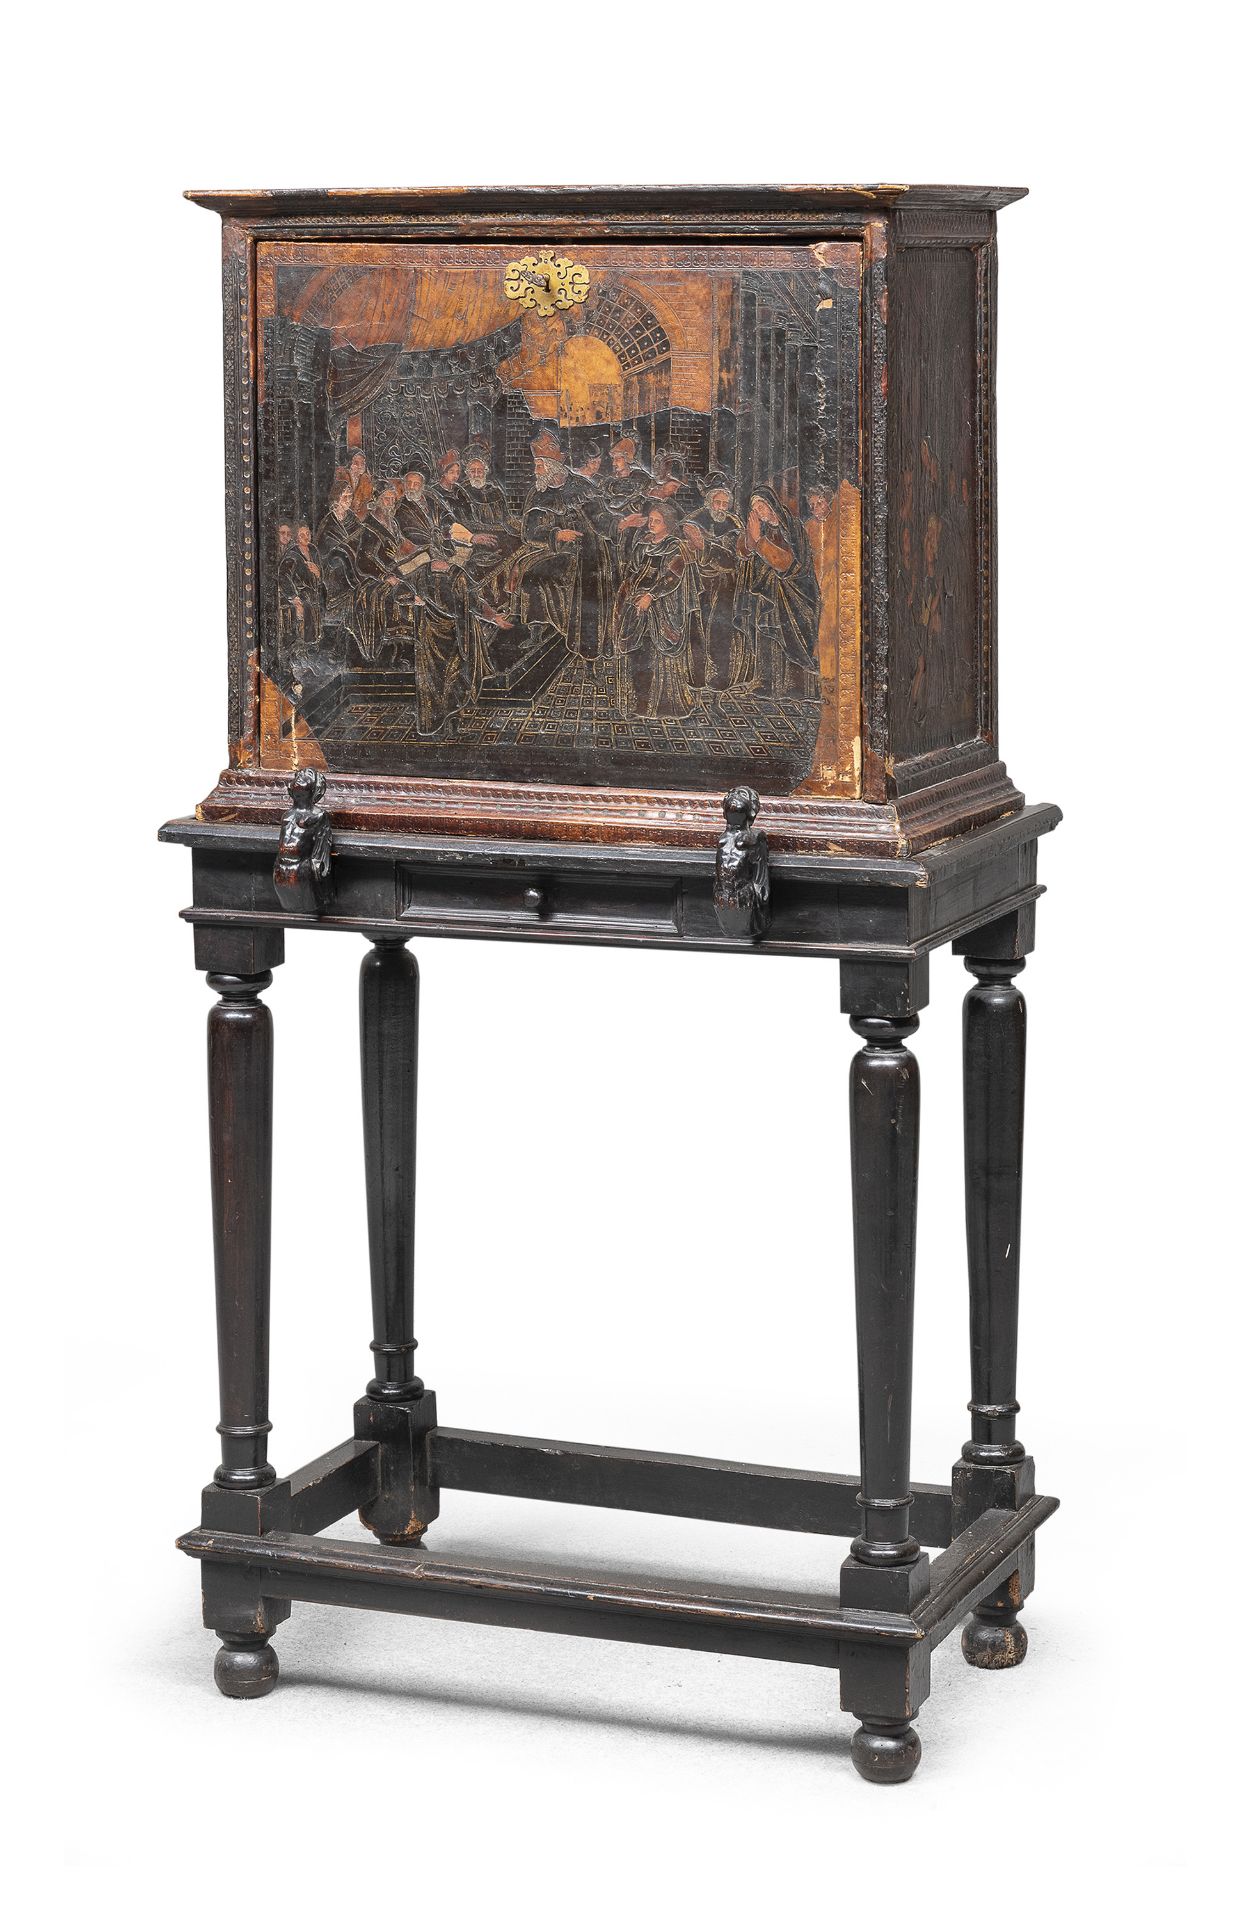 COIN CABINET IN WOOD AND LEATHER PROBABLY SPAIN LATE 16TH CENTURY